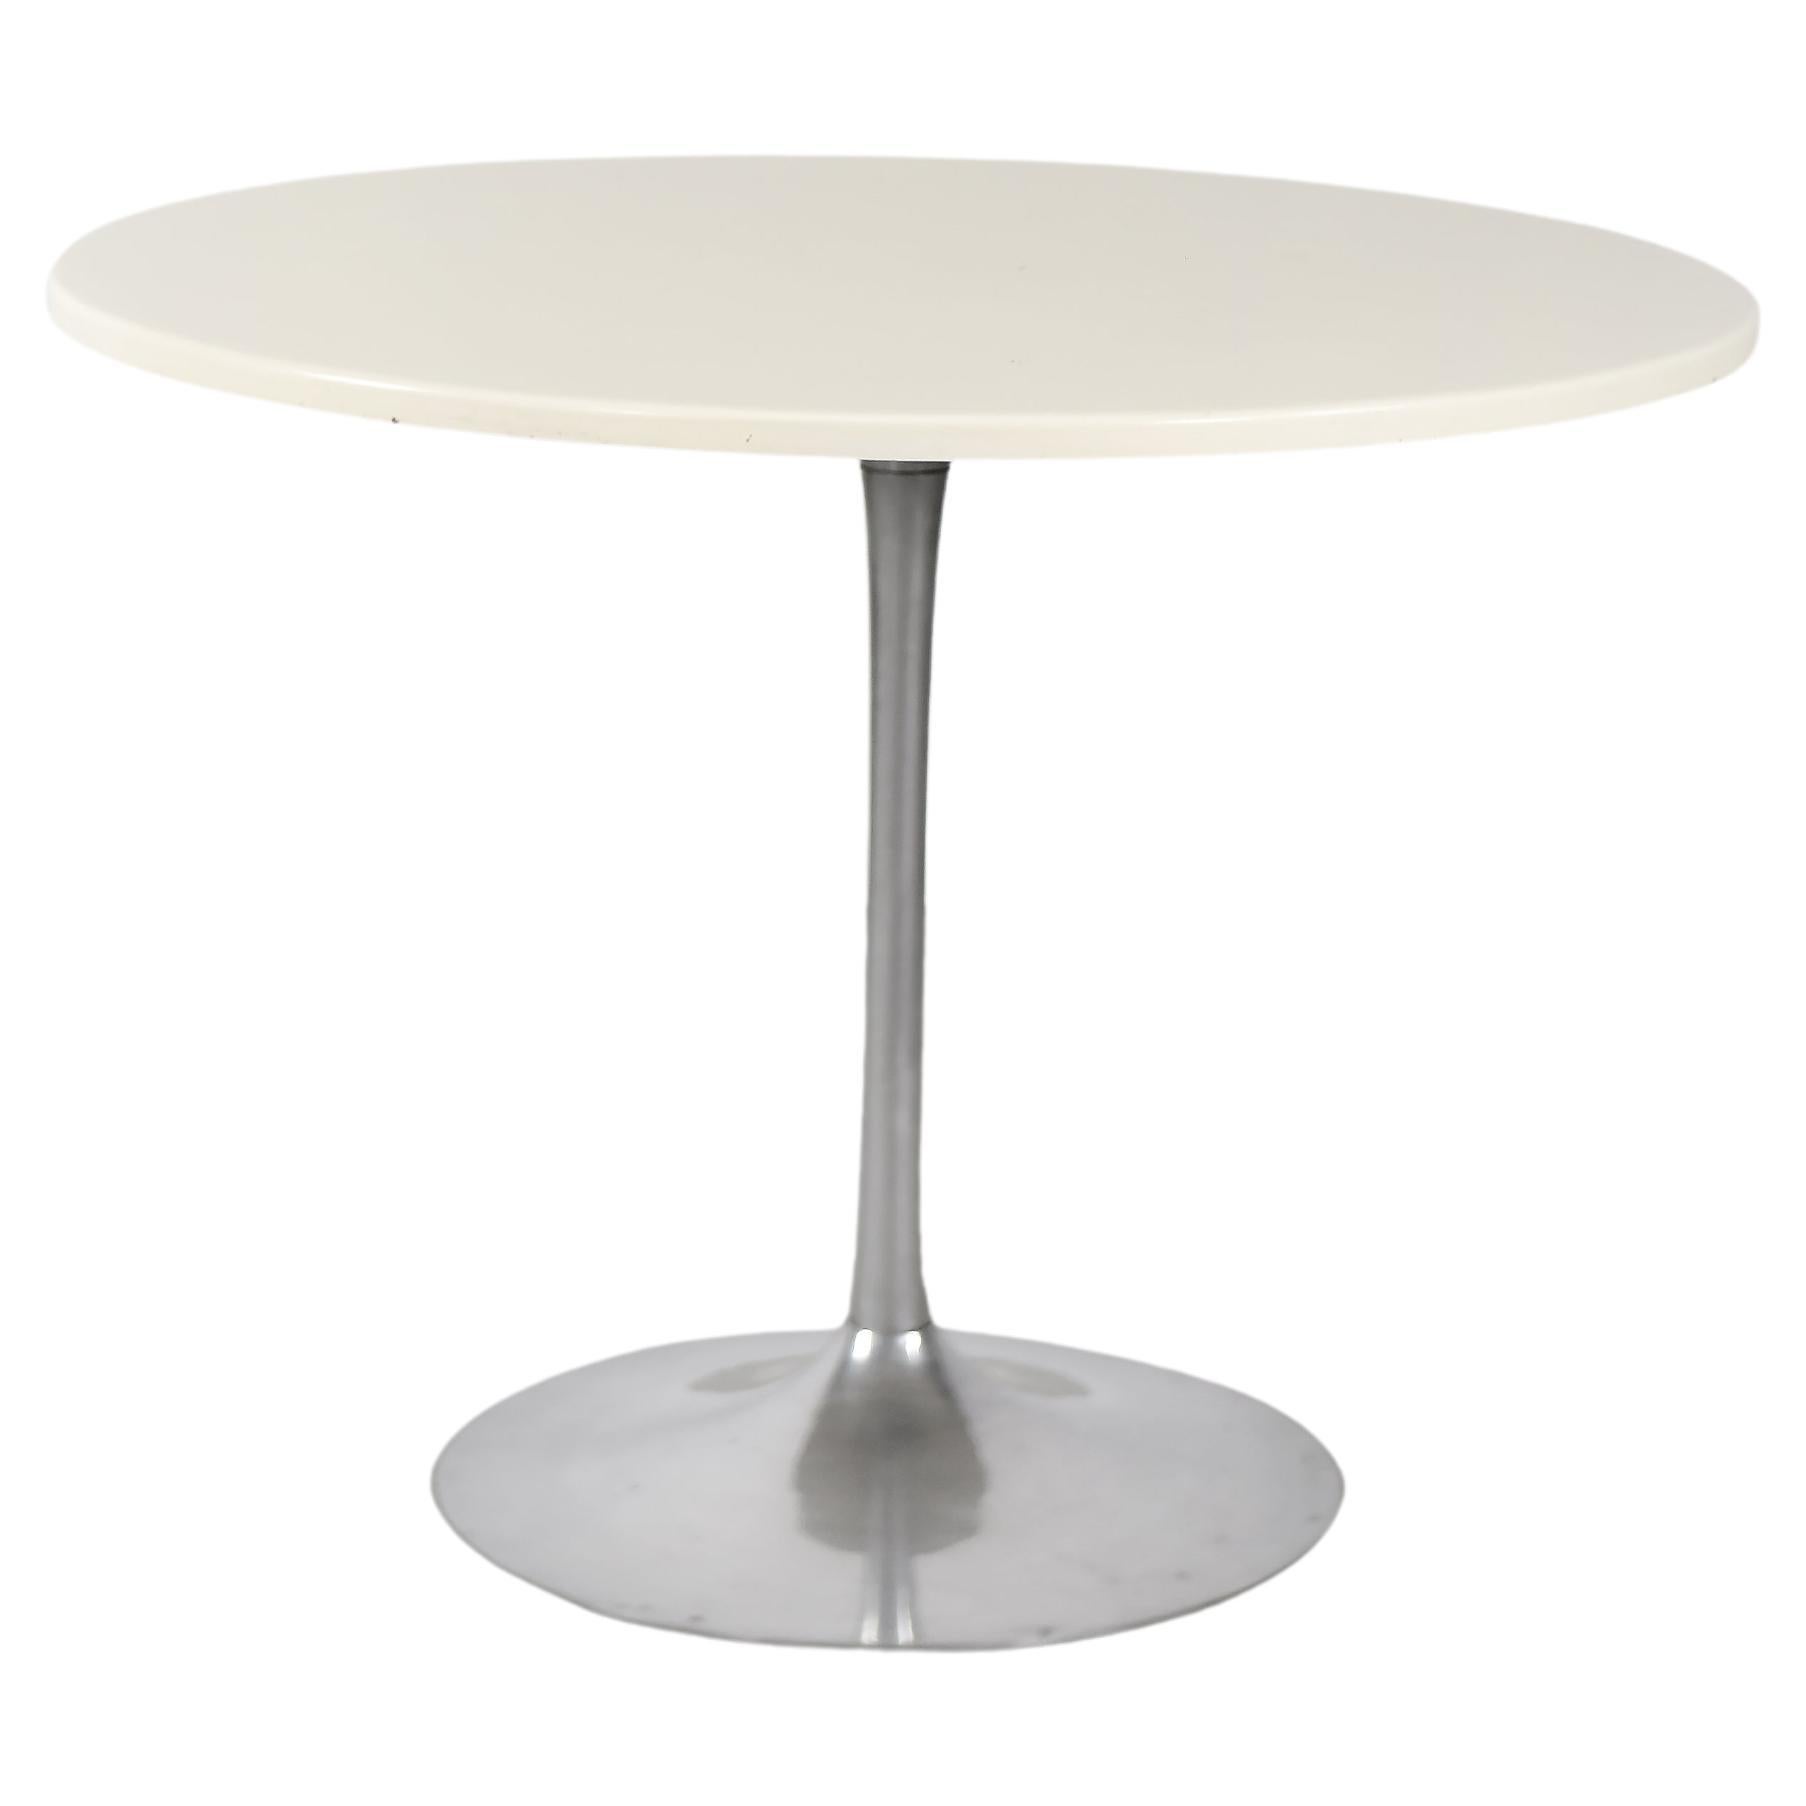 Vintage Scandinavian MidCentury Modern Dining Table with Chrome Metal Tulip Leg. For Sale